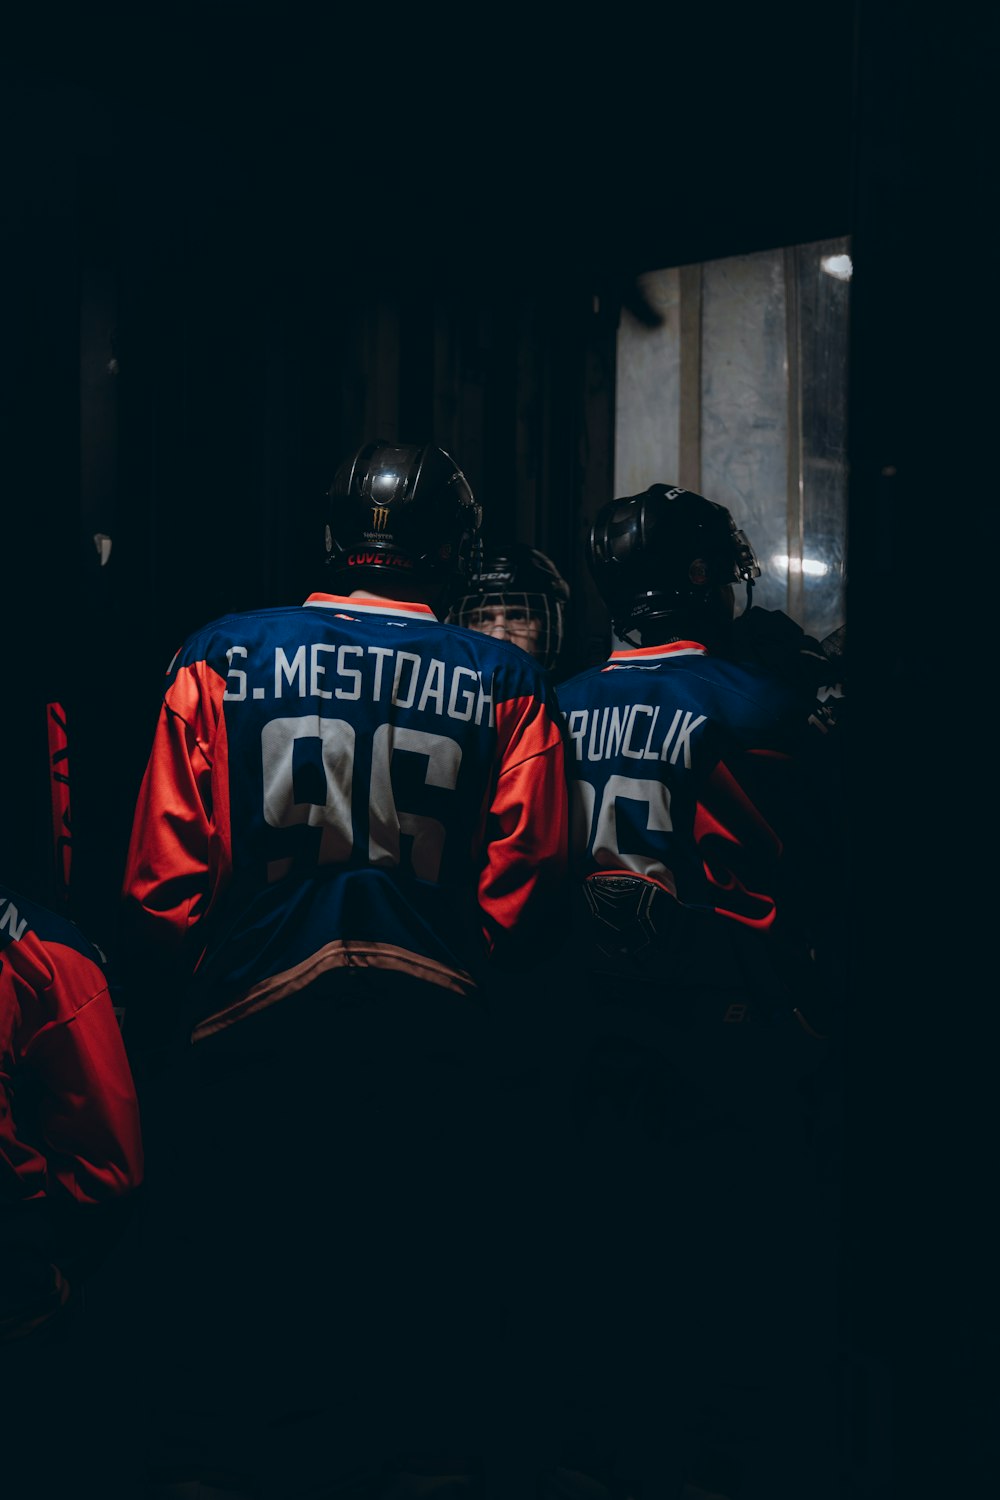 a group of people wearing hockey uniforms